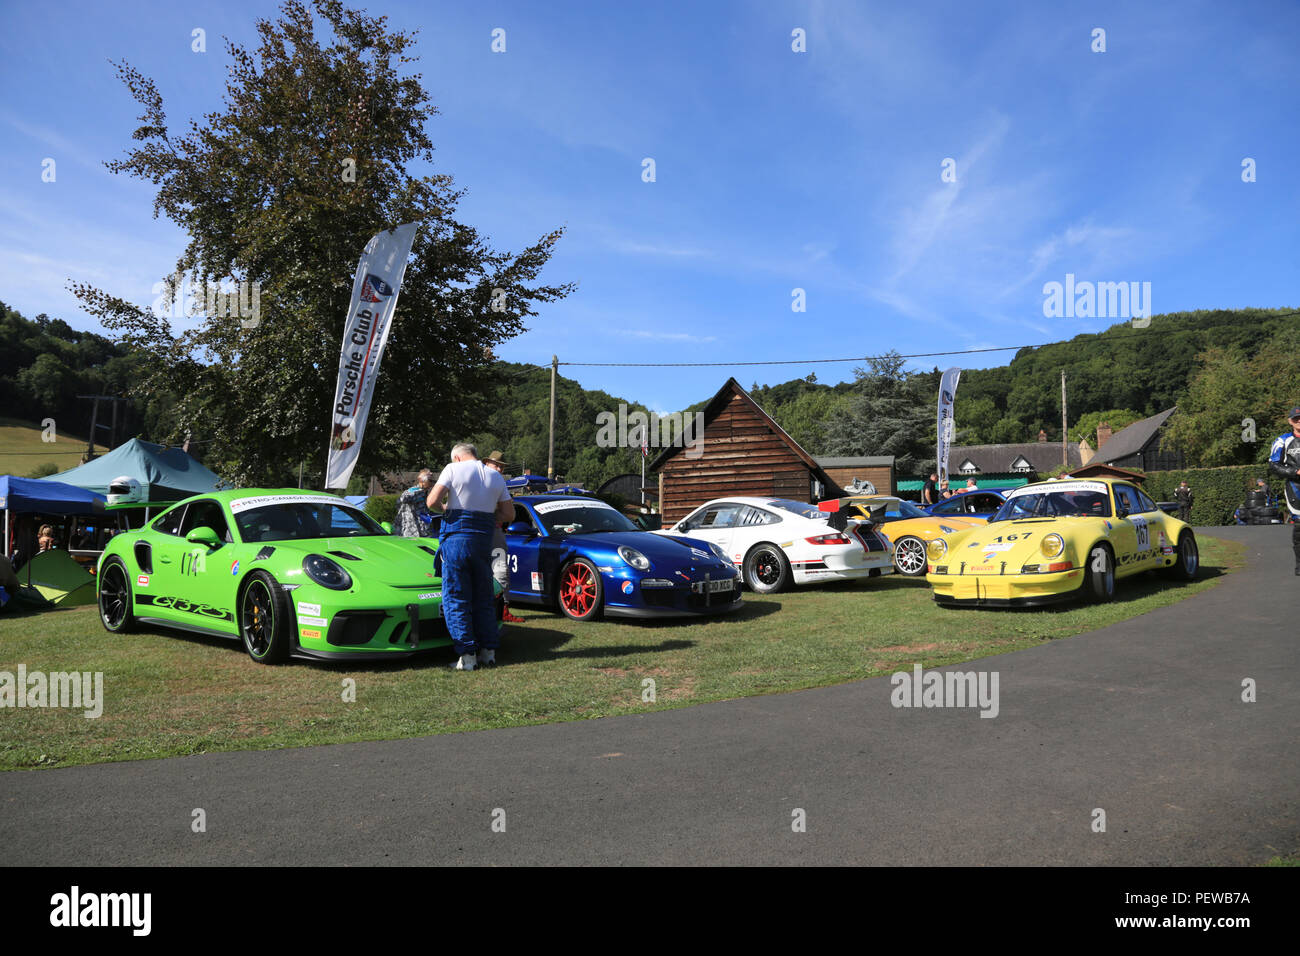 Racing Porsche 911`s in a sunny paddock at Shelsley Walsh hillclimb, Worcestershire, England, UK. Stock Photo